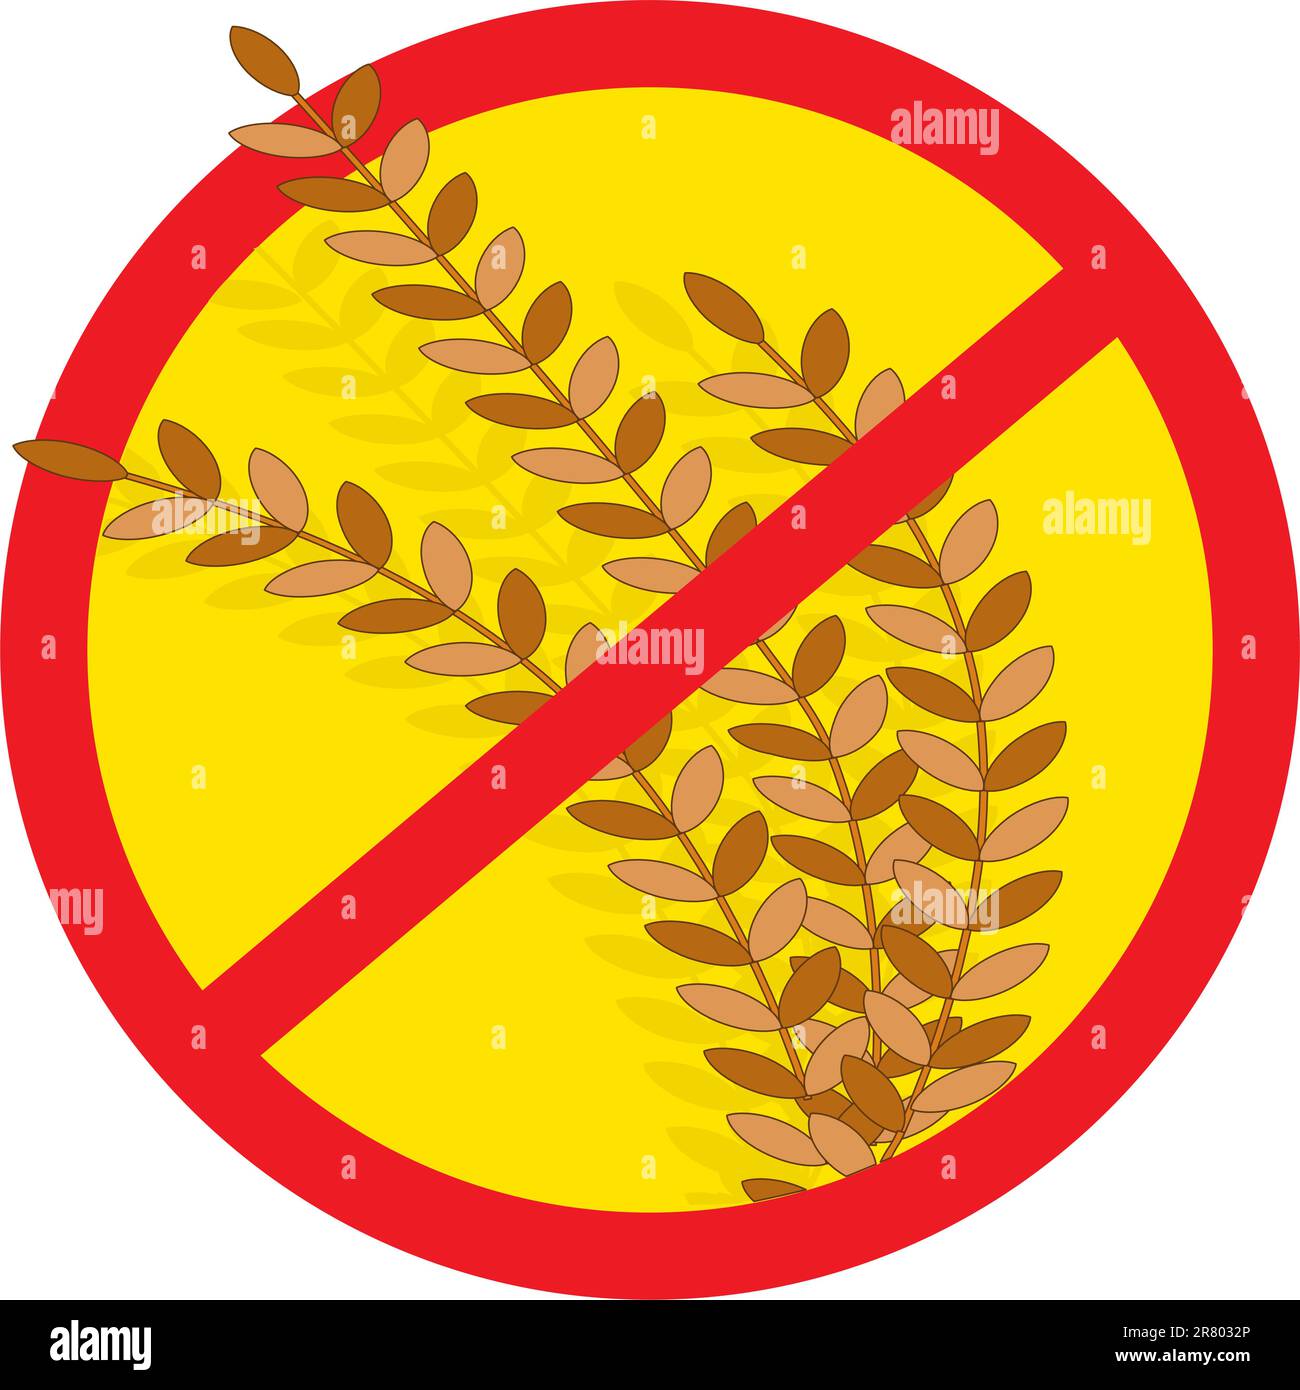 A red circle outline with a slash through it, is superimposed over stems of wheat, clearly indicating NO WHEAT. Stock Vector